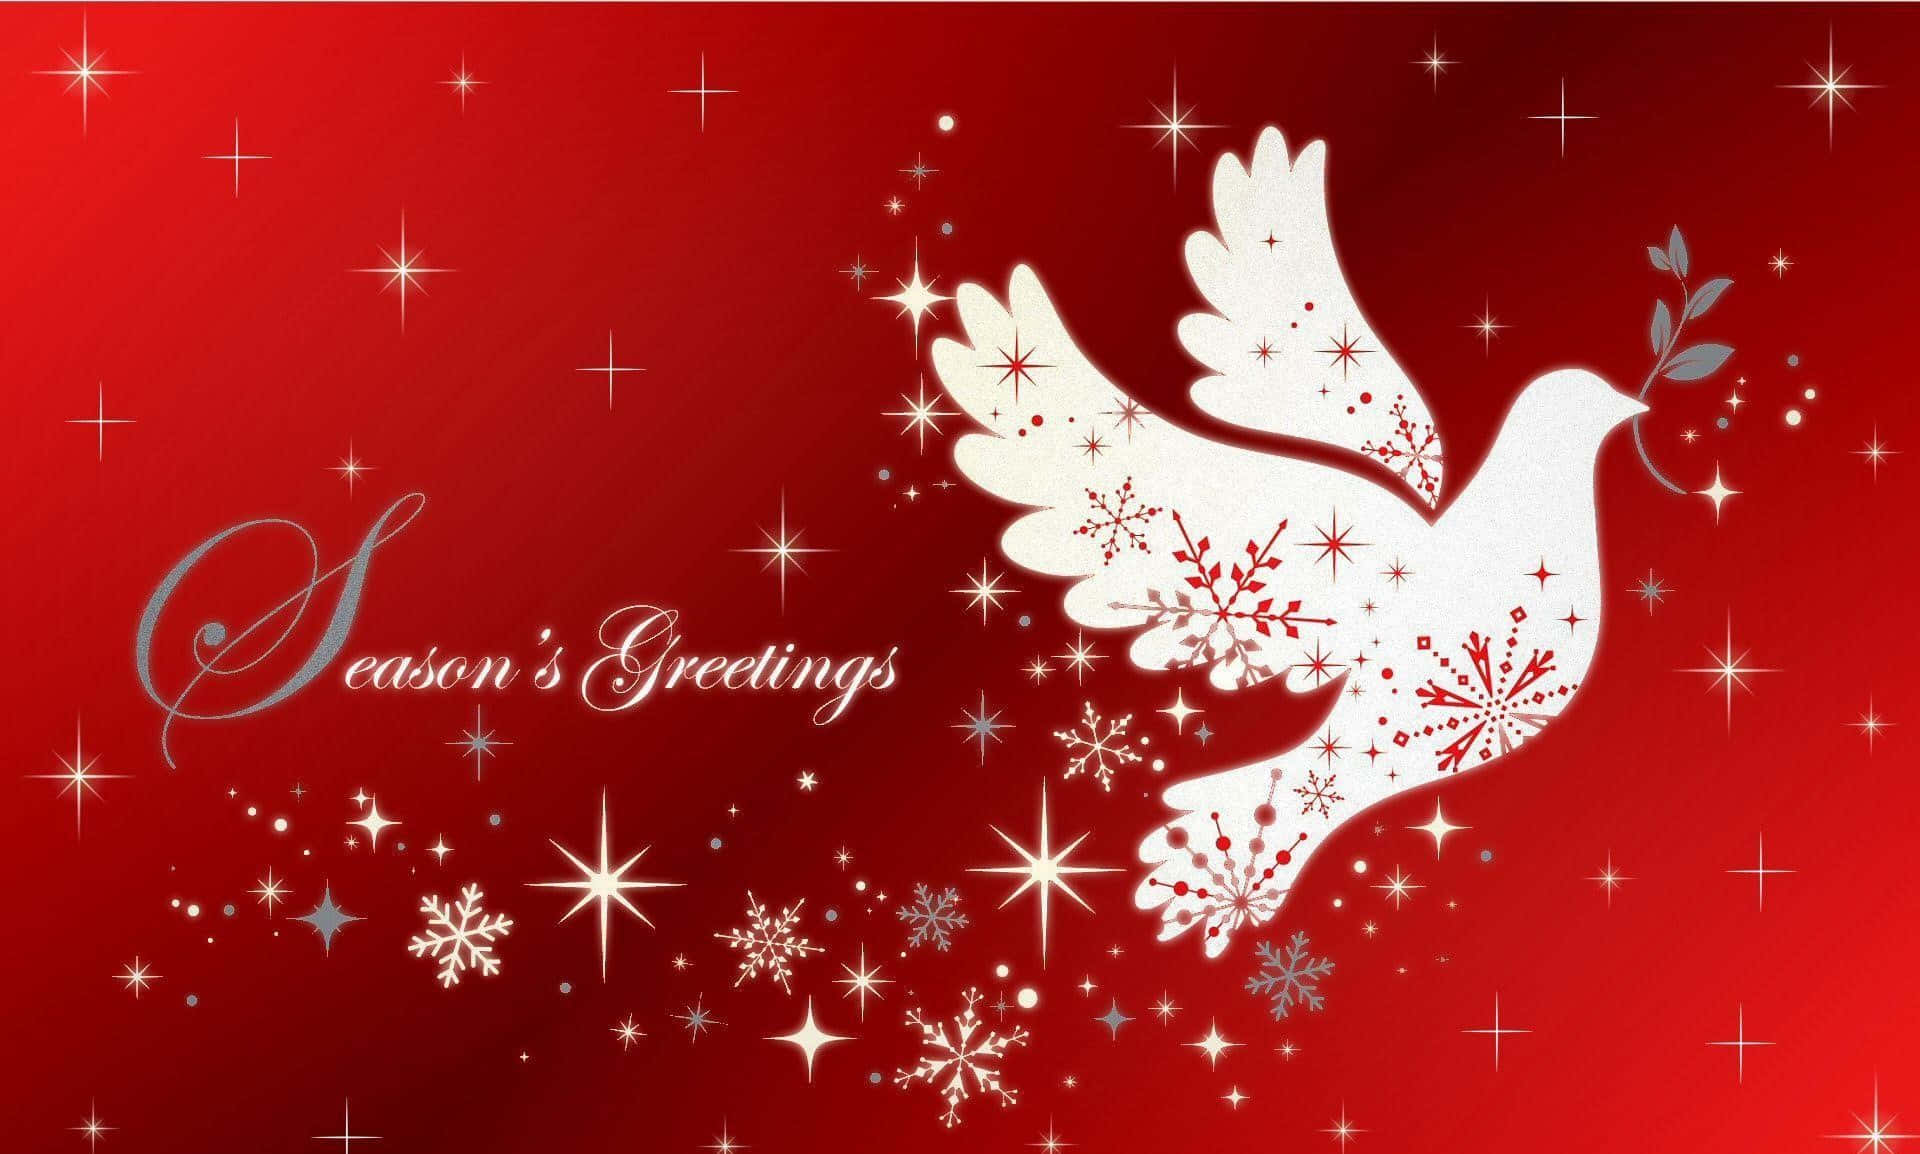 Warm Greetings Background with Fairy Lights